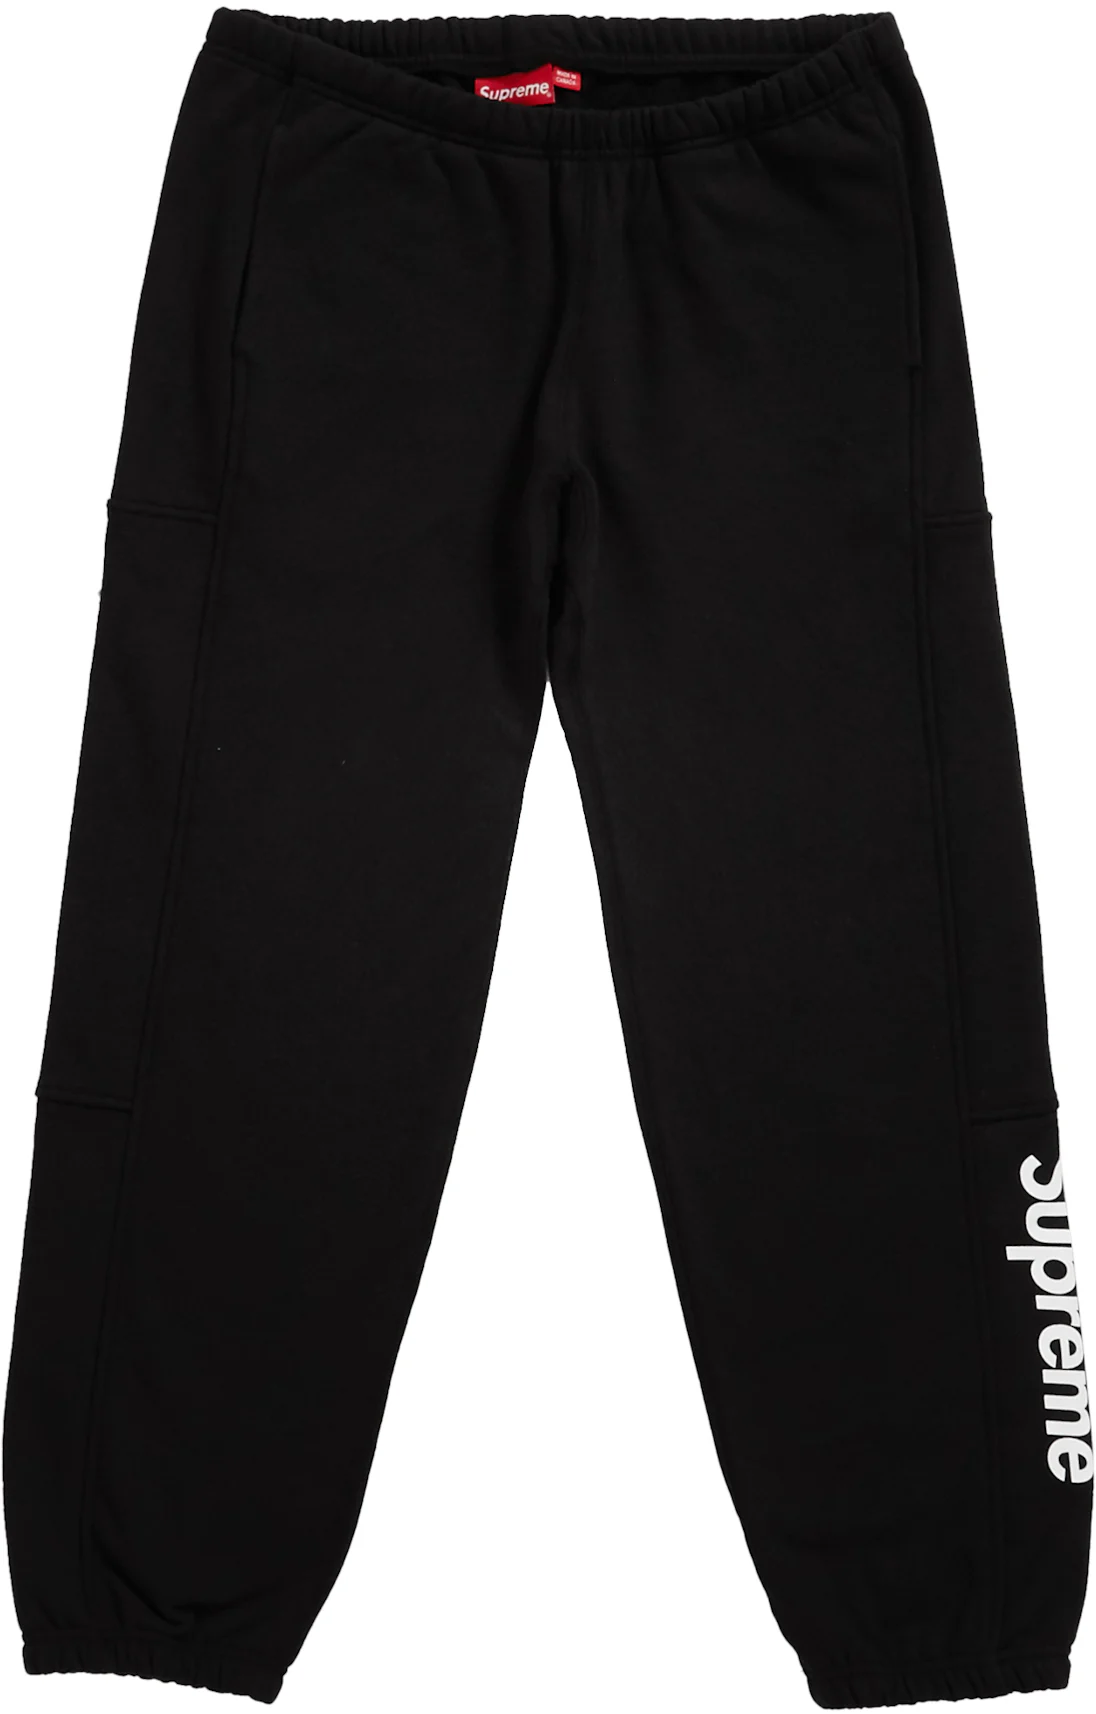 Supreme Black Sweatpants With Embroidered Logo – The Feels Apparel